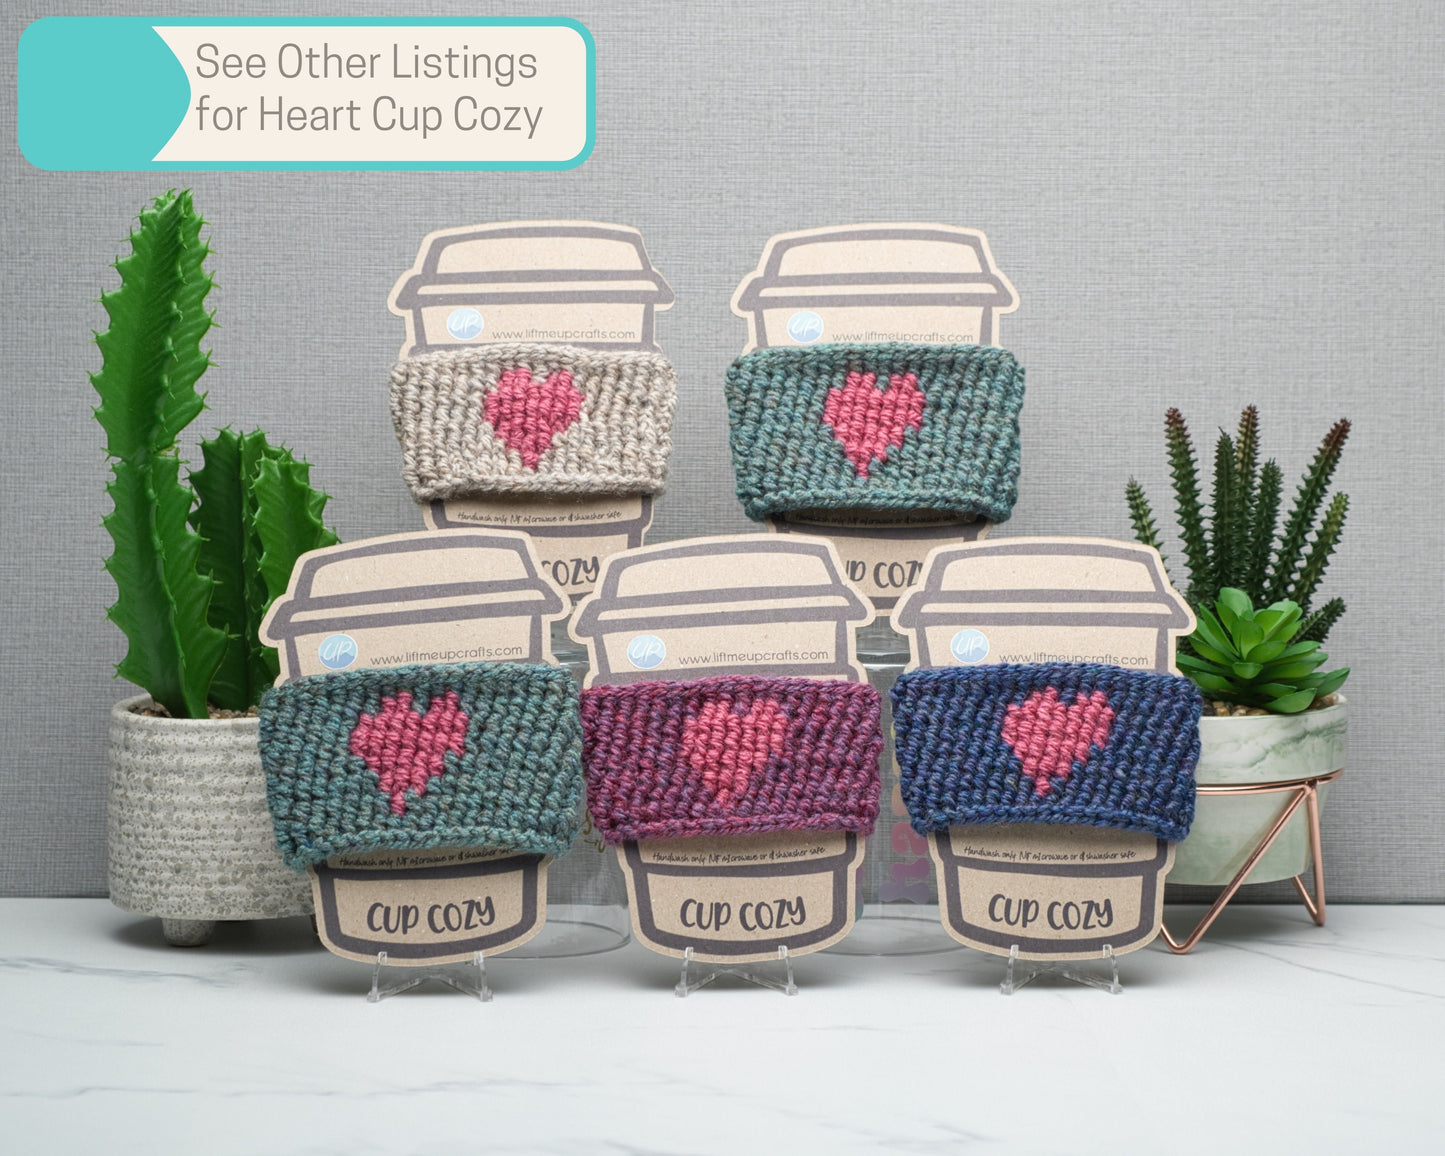 Cute Crochet Cup Cozy for Takeaway Cups with Wooden Buttons, Eco Friendly Handmade Coffee Lovers Gift, Self Care Inspirational Quotes, Berry